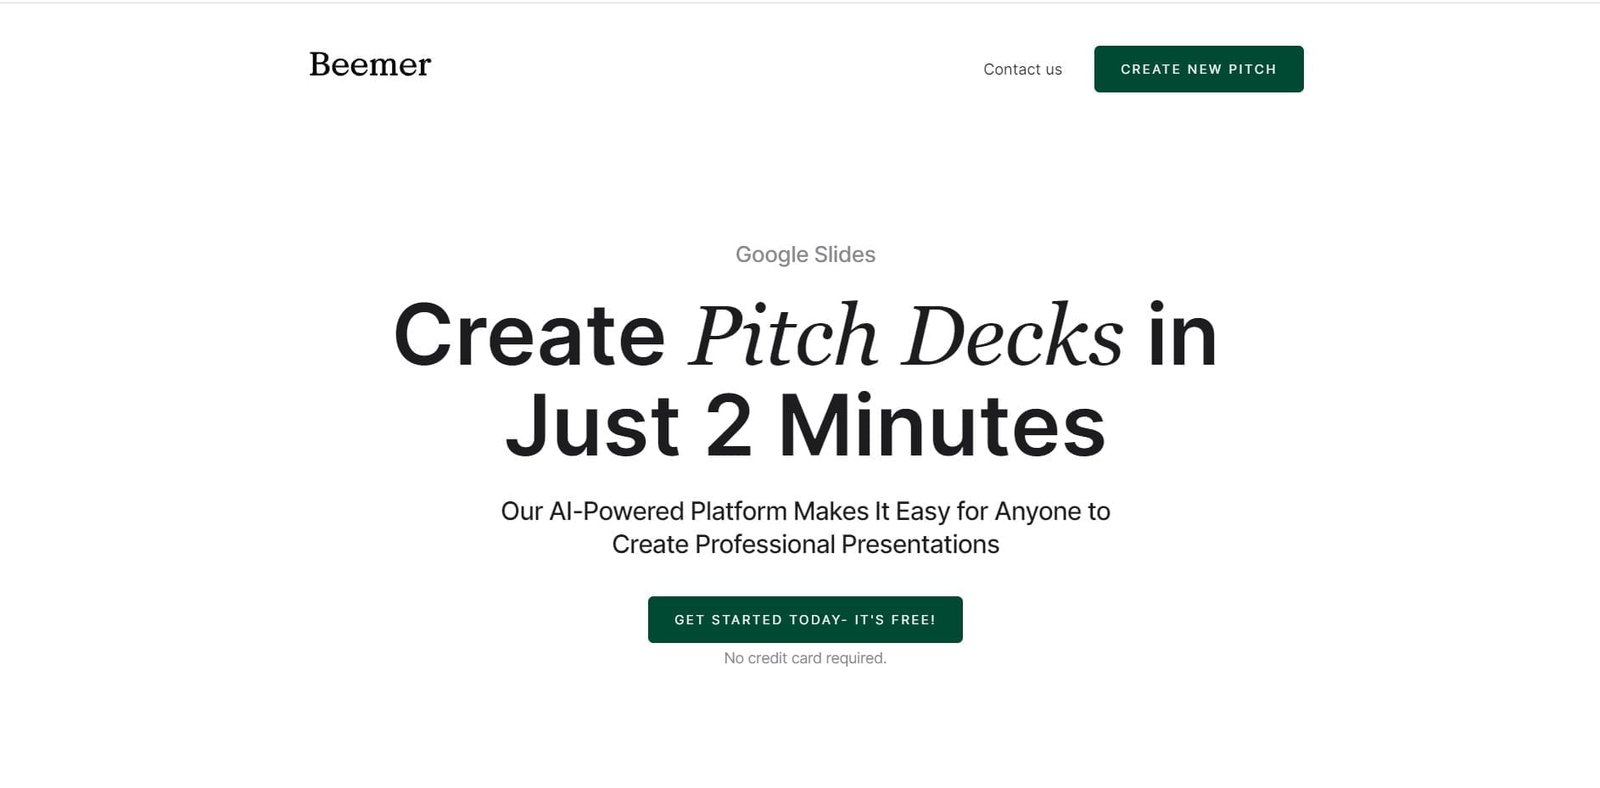 Beemer is an AI presentation tool that simplifies the process of creating pitch decks for startups and small businesses.